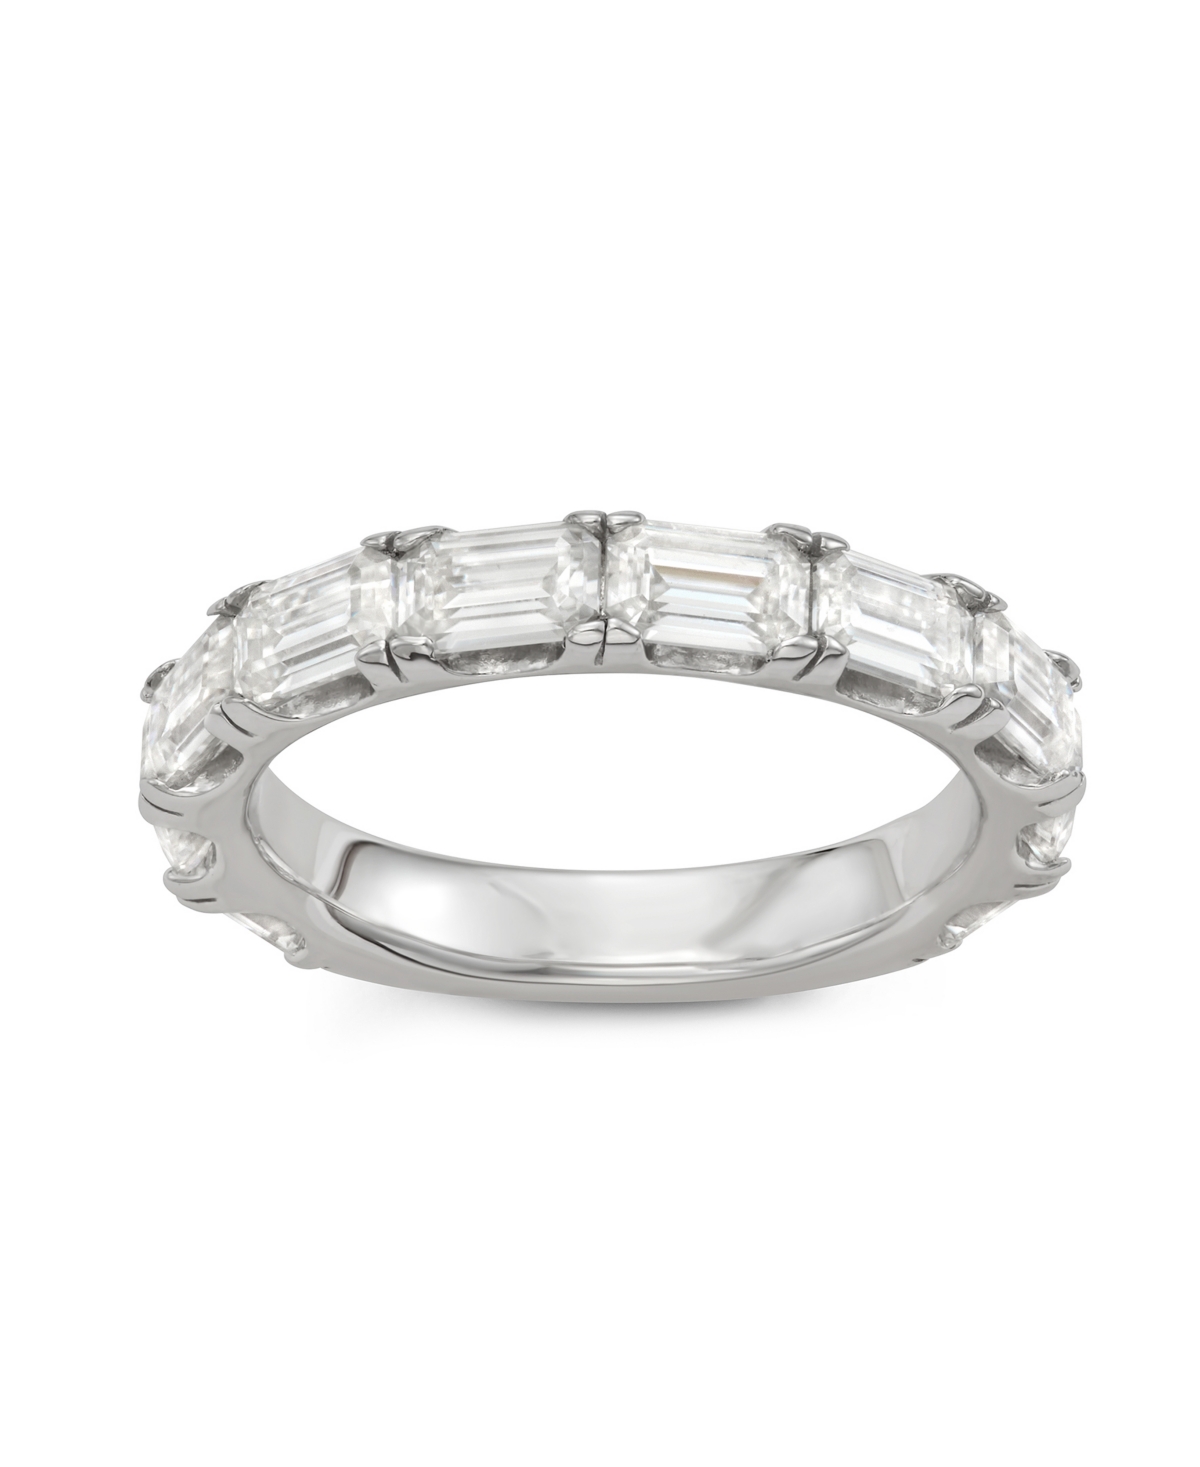 Moissanite Emerald Cut Wedding Band (2 3/4 ct. t.w. Diamond Equivalent) in Sterling Silver - Sterling Silver